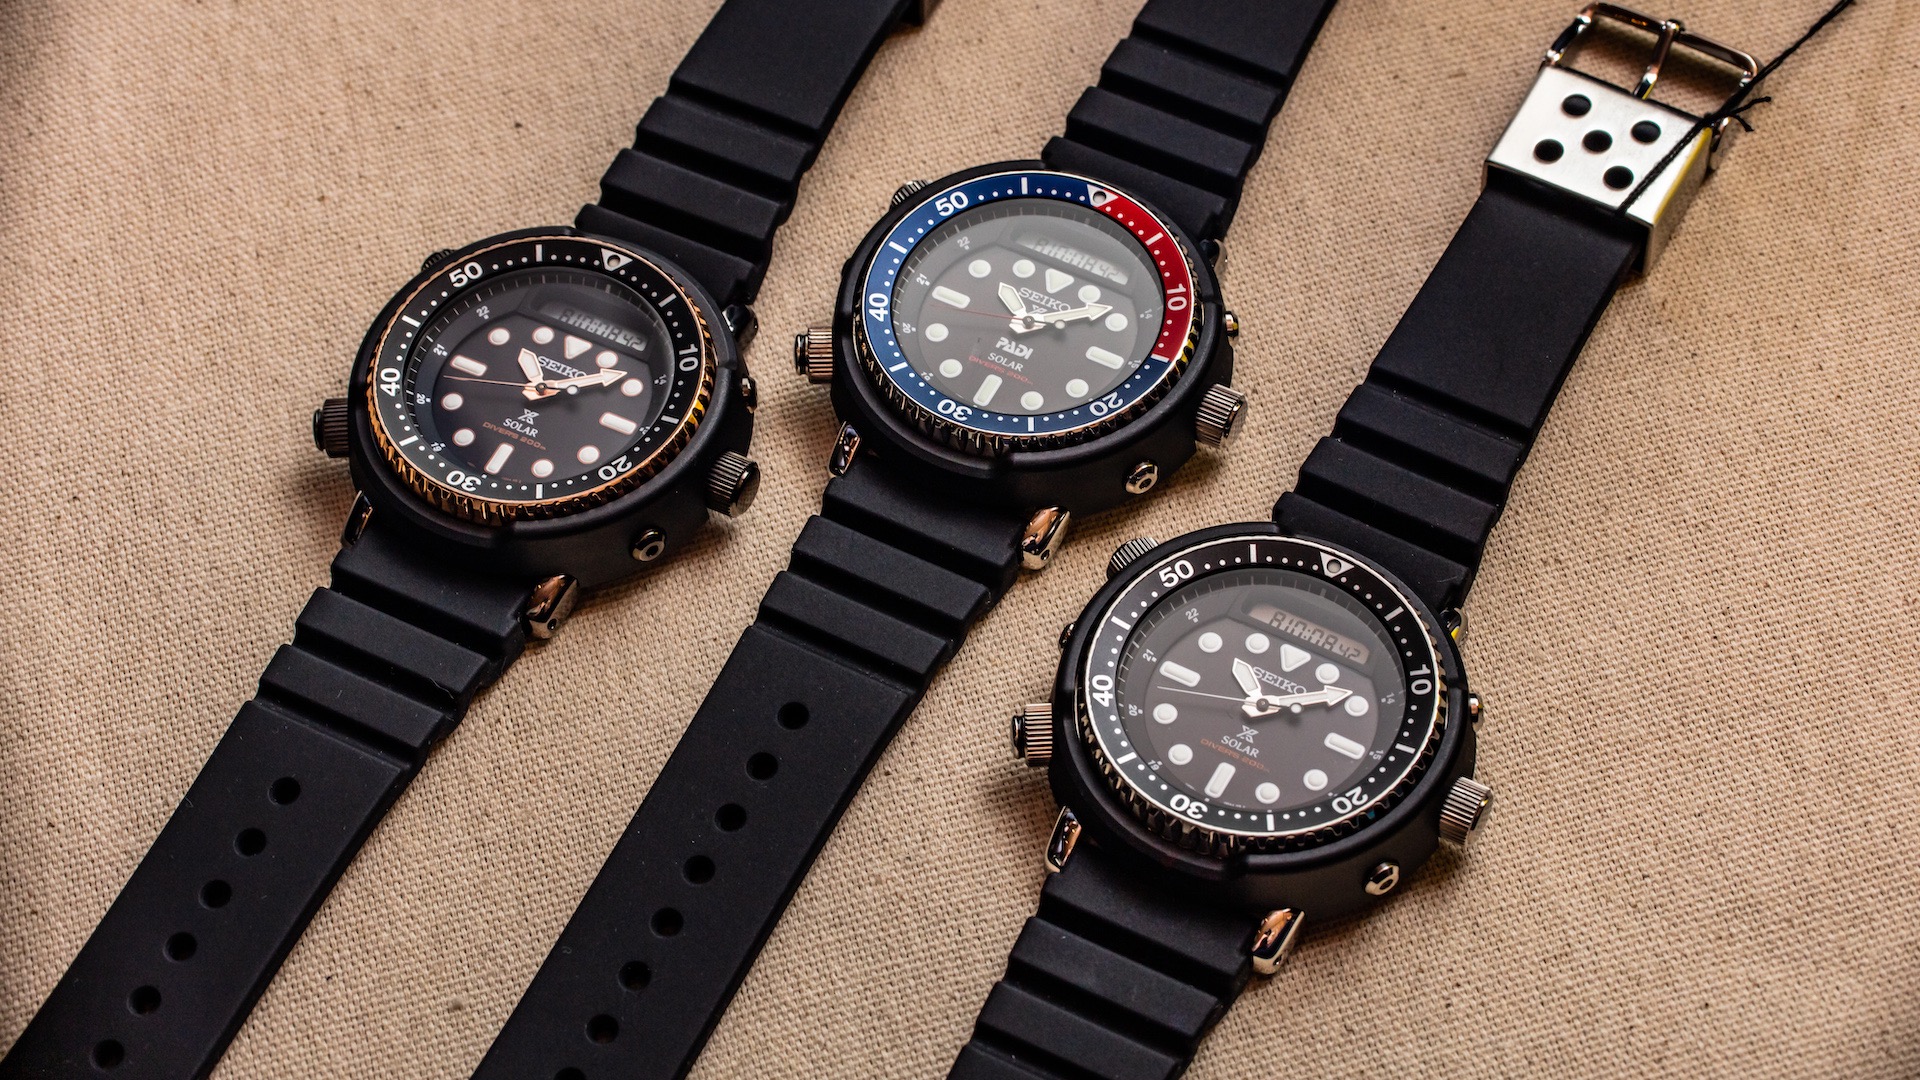 Hands-On With The Reissued Seiko Solar 'Arnie' Prospex SNJ025 & SNJ027 Watches Hands-On